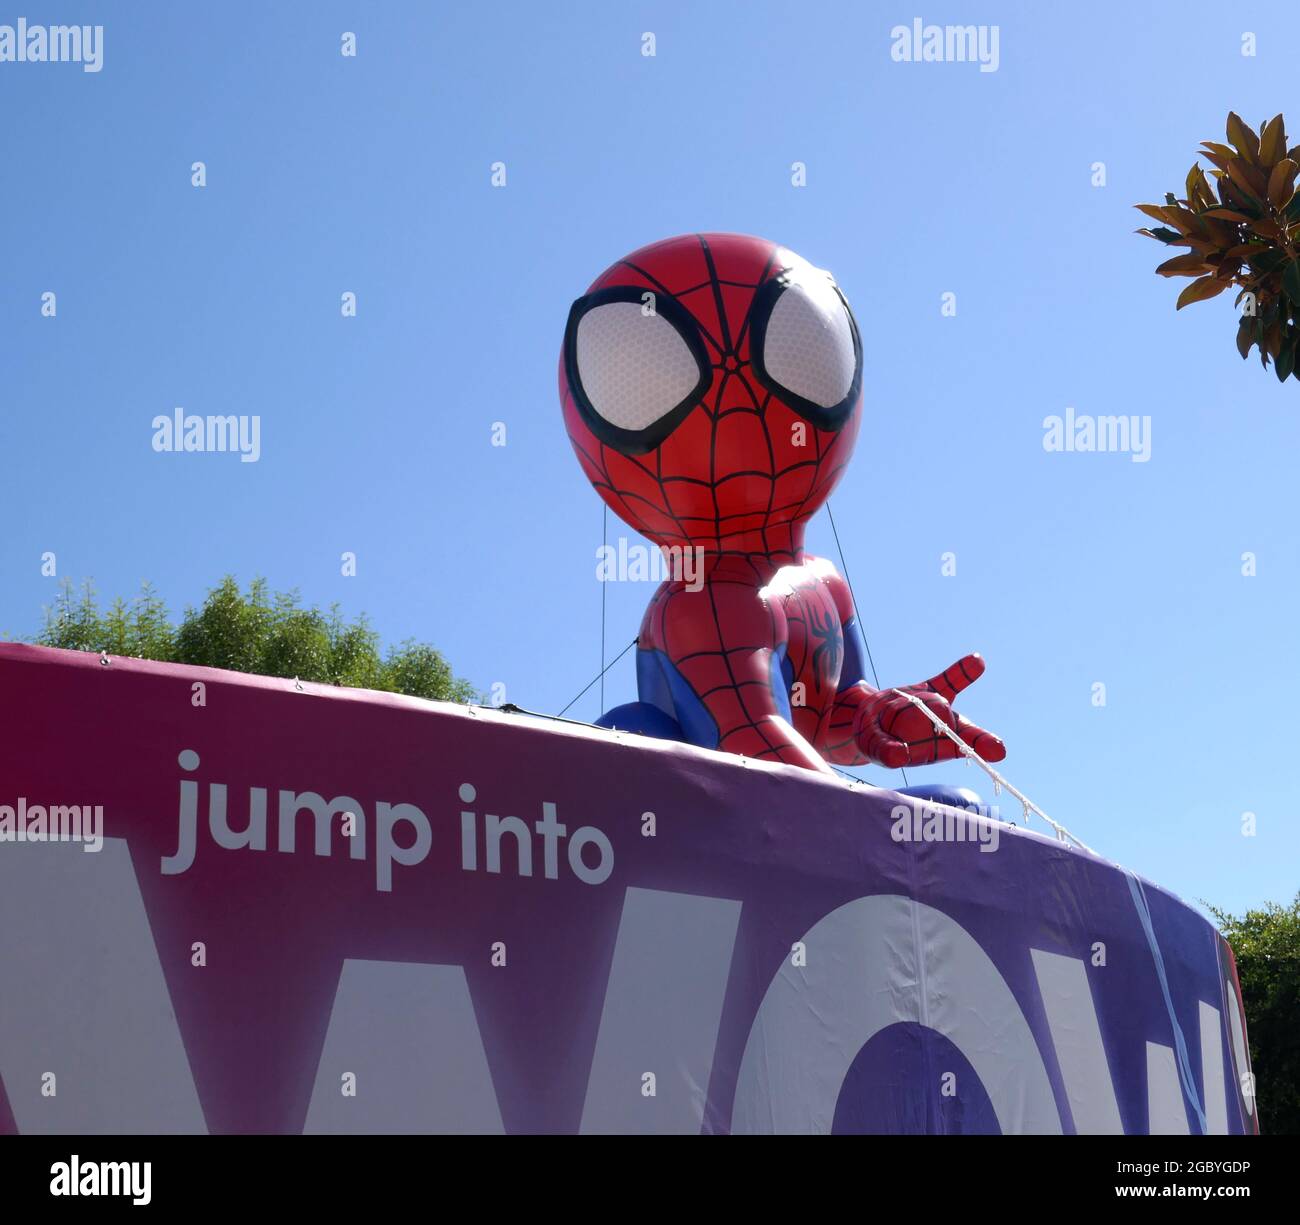 SS3472690) Television picture of The Amazing Spider-Man buy celebrity  photos and posters at